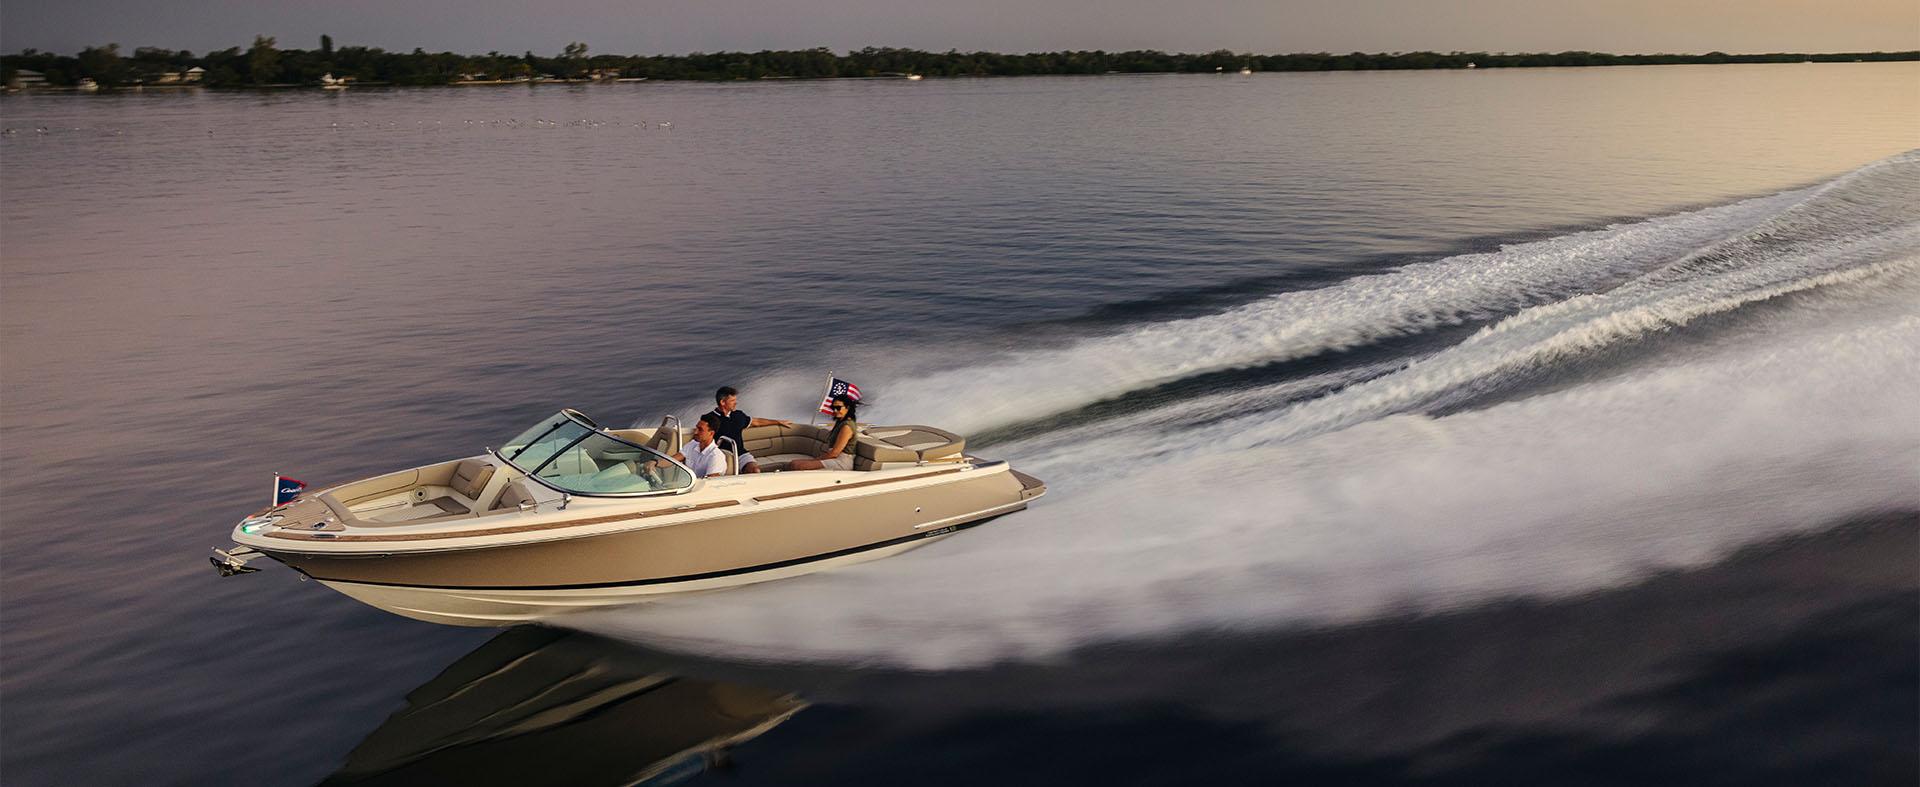 People riding on a Chris Craft speedboat in the water